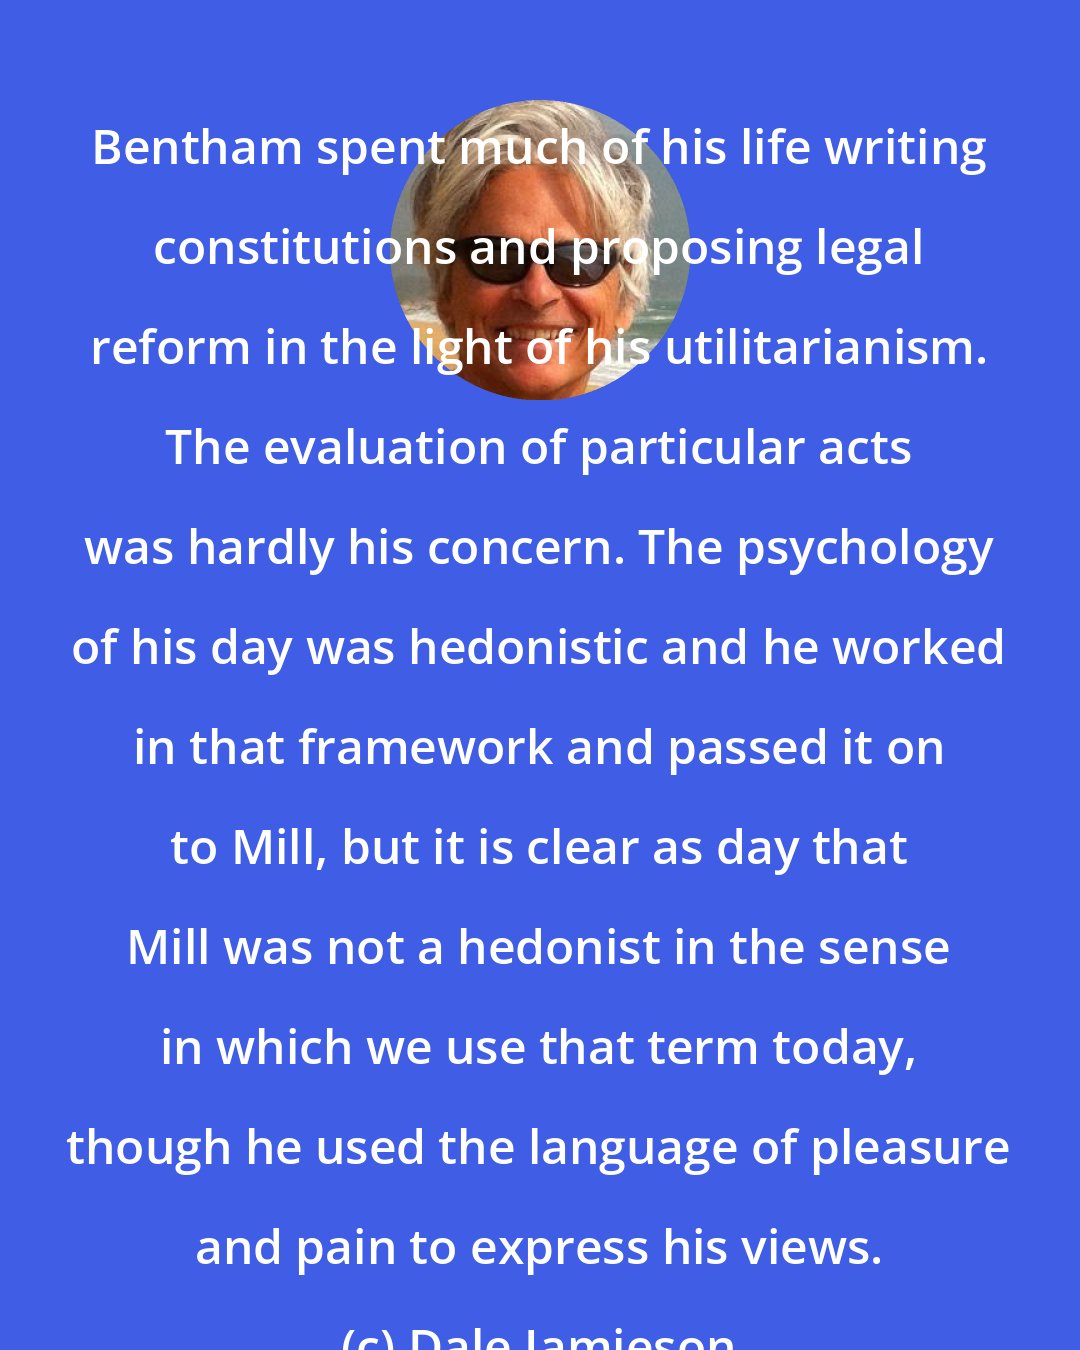 Dale Jamieson: Bentham spent much of his life writing constitutions and proposing legal reform in the light of his utilitarianism. The evaluation of particular acts was hardly his concern. The psychology of his day was hedonistic and he worked in that framework and passed it on to Mill, but it is clear as day that Mill was not a hedonist in the sense in which we use that term today, though he used the language of pleasure and pain to express his views.